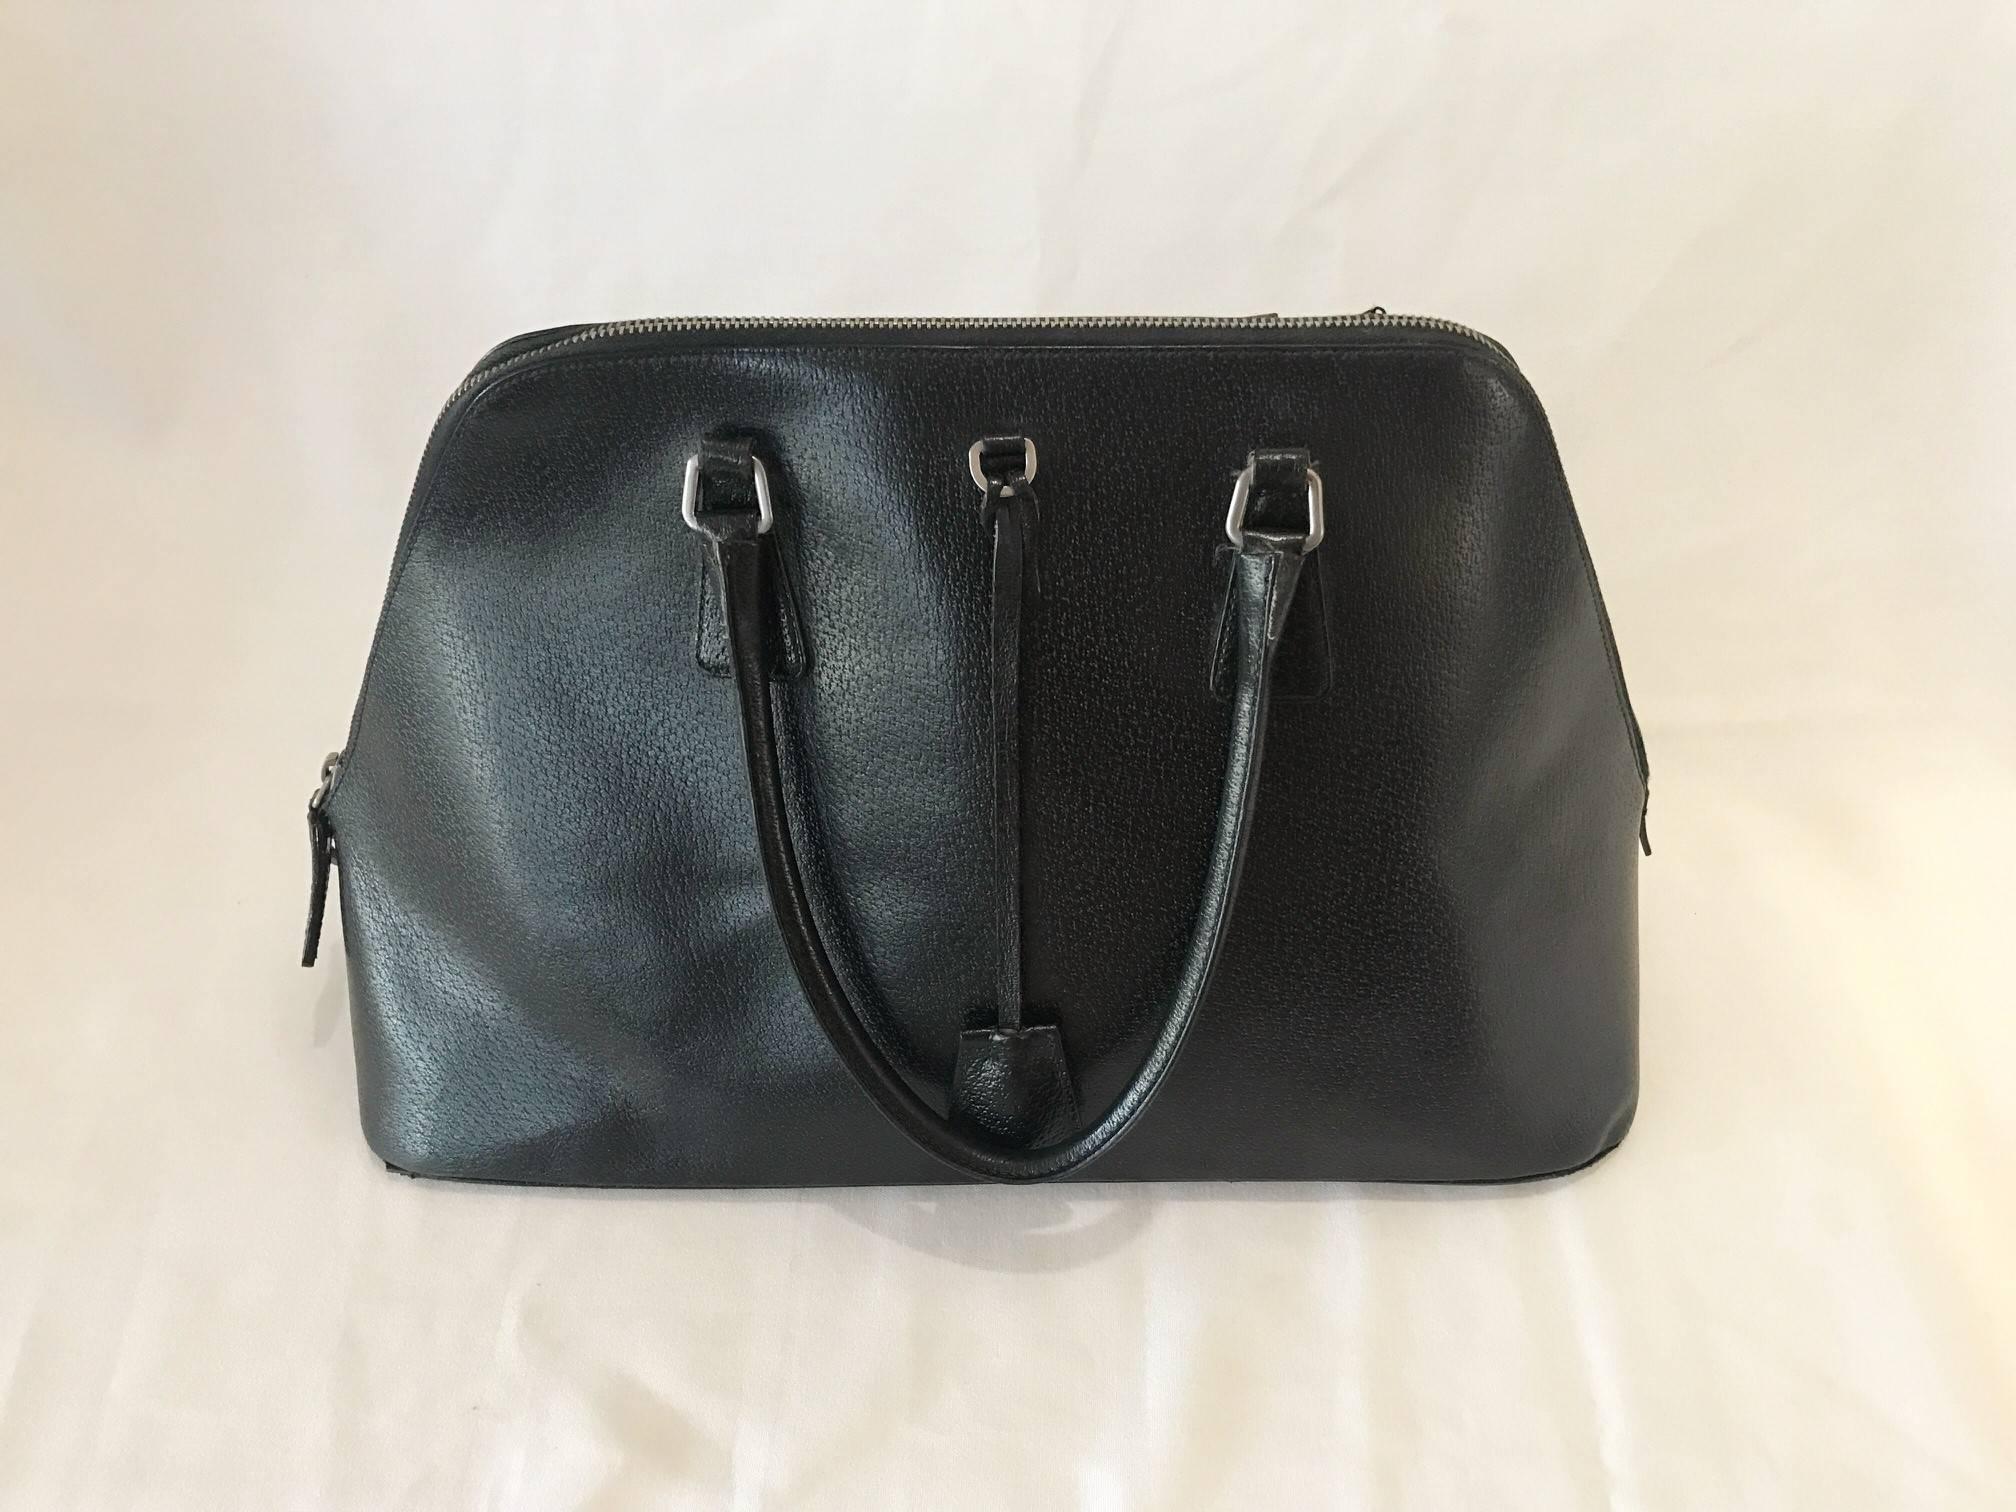 Black beauty Prada handbag with key and lock! Authentic Prada leather bag. Really great - rarely worn/used - Practically New! Clean and awesome authentic Prada.